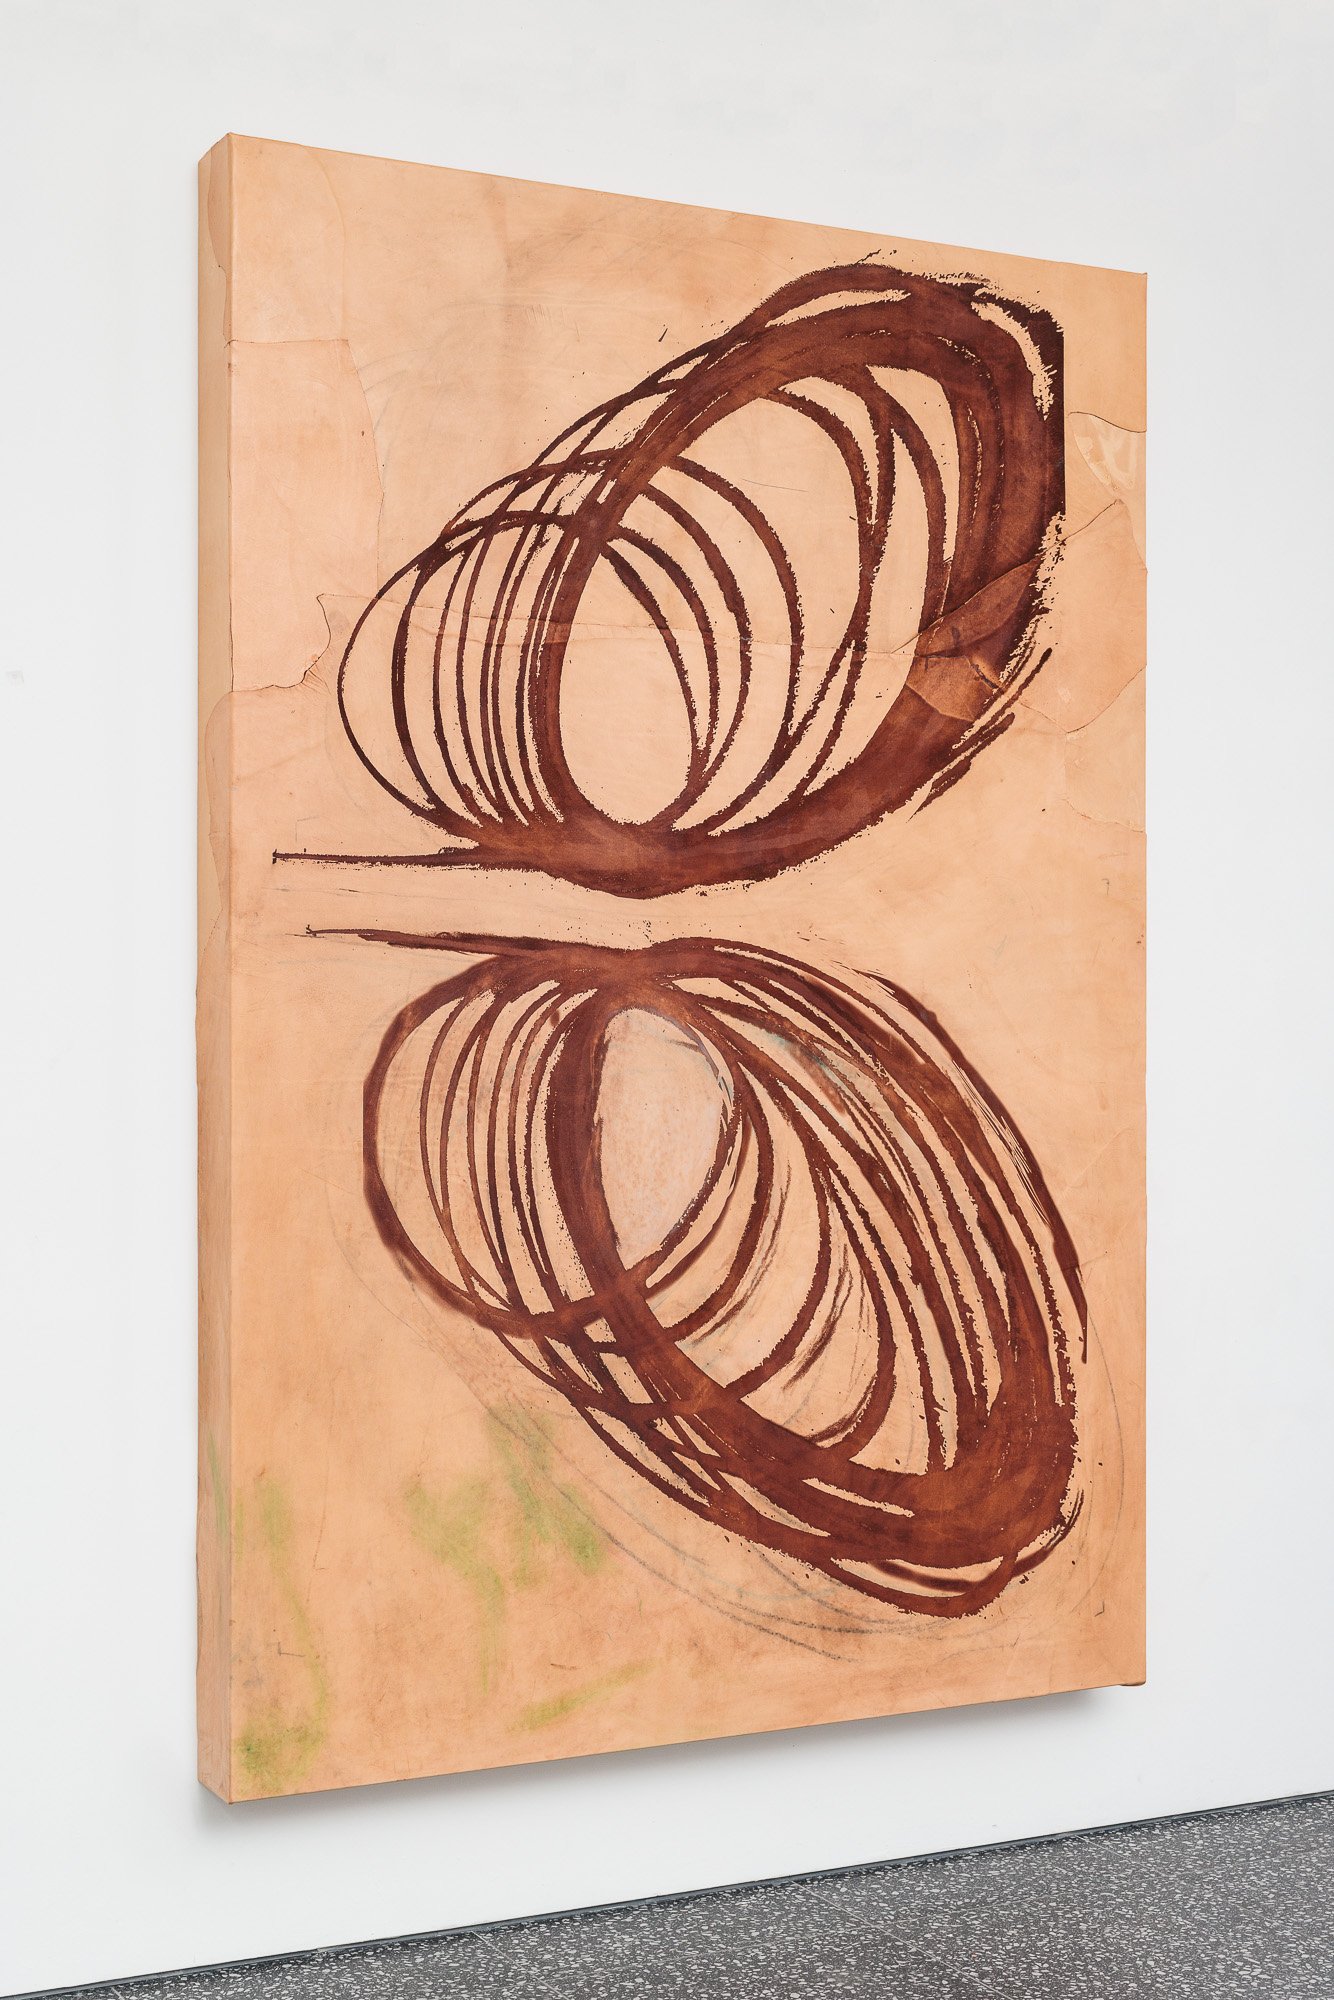 Lena HenkeCombustions 18 [Two Wheeler], 2024Laser etched leather, pigment on wooden panel250 x 170 x 15 cm